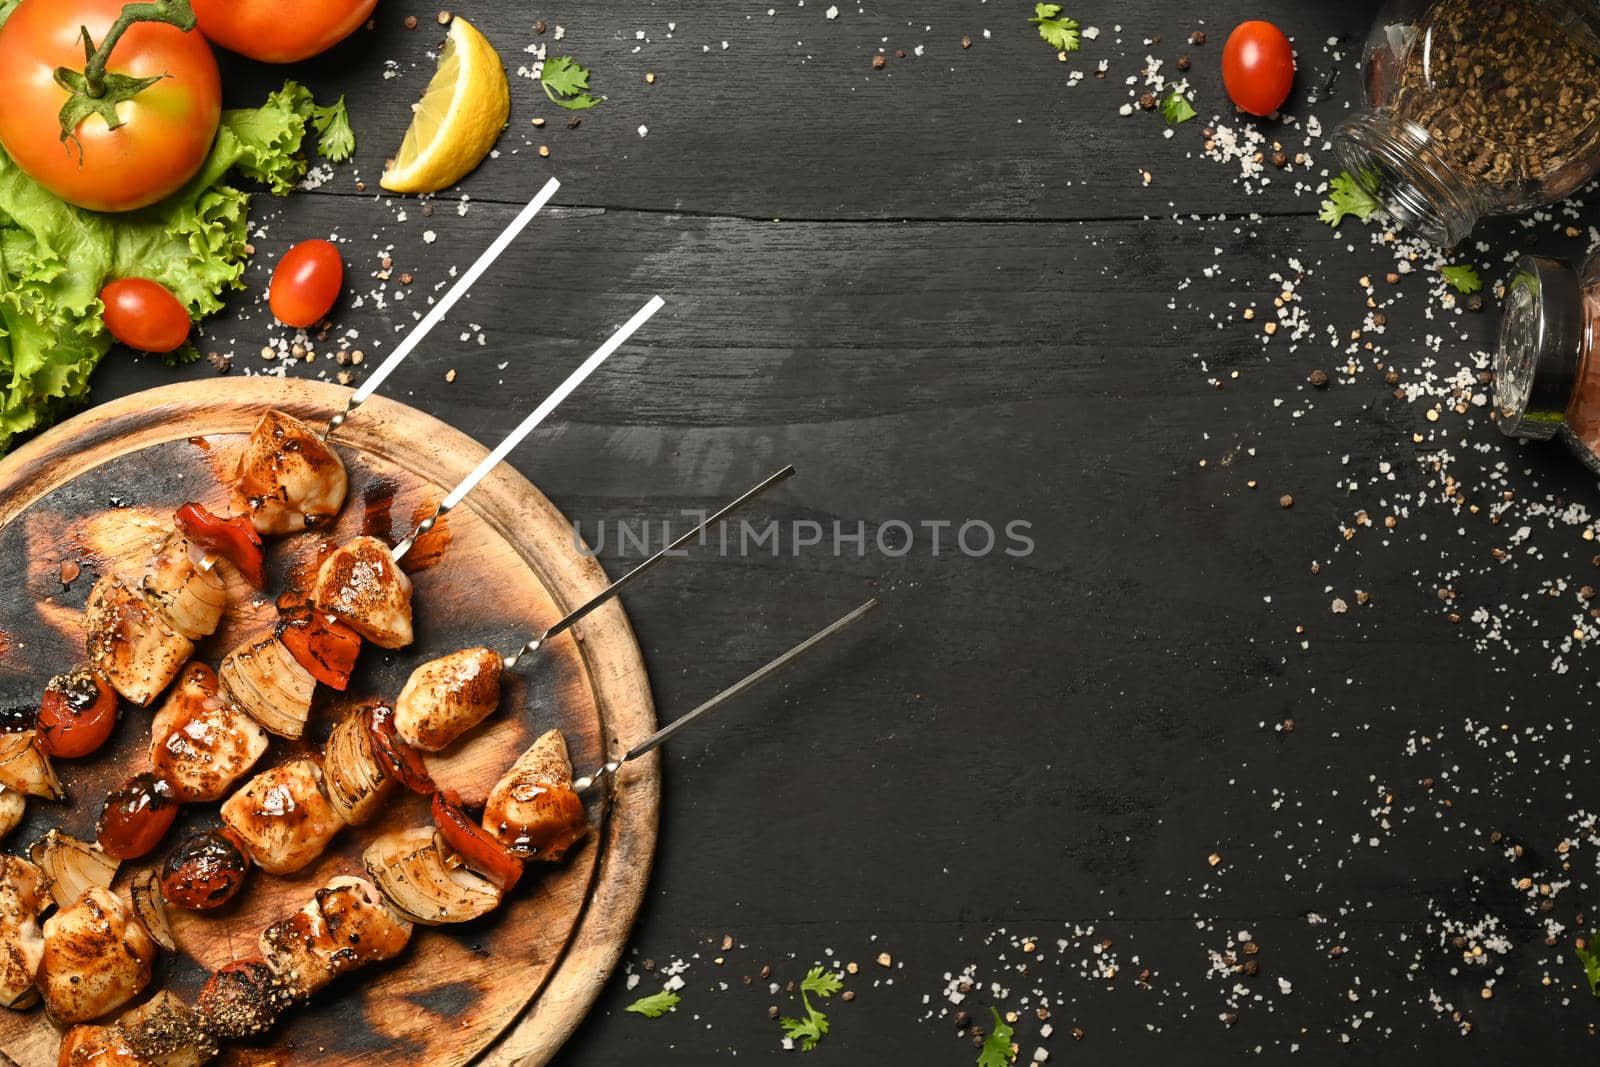 Grilled meat and vegetables on wooden background. Top view with copy space.